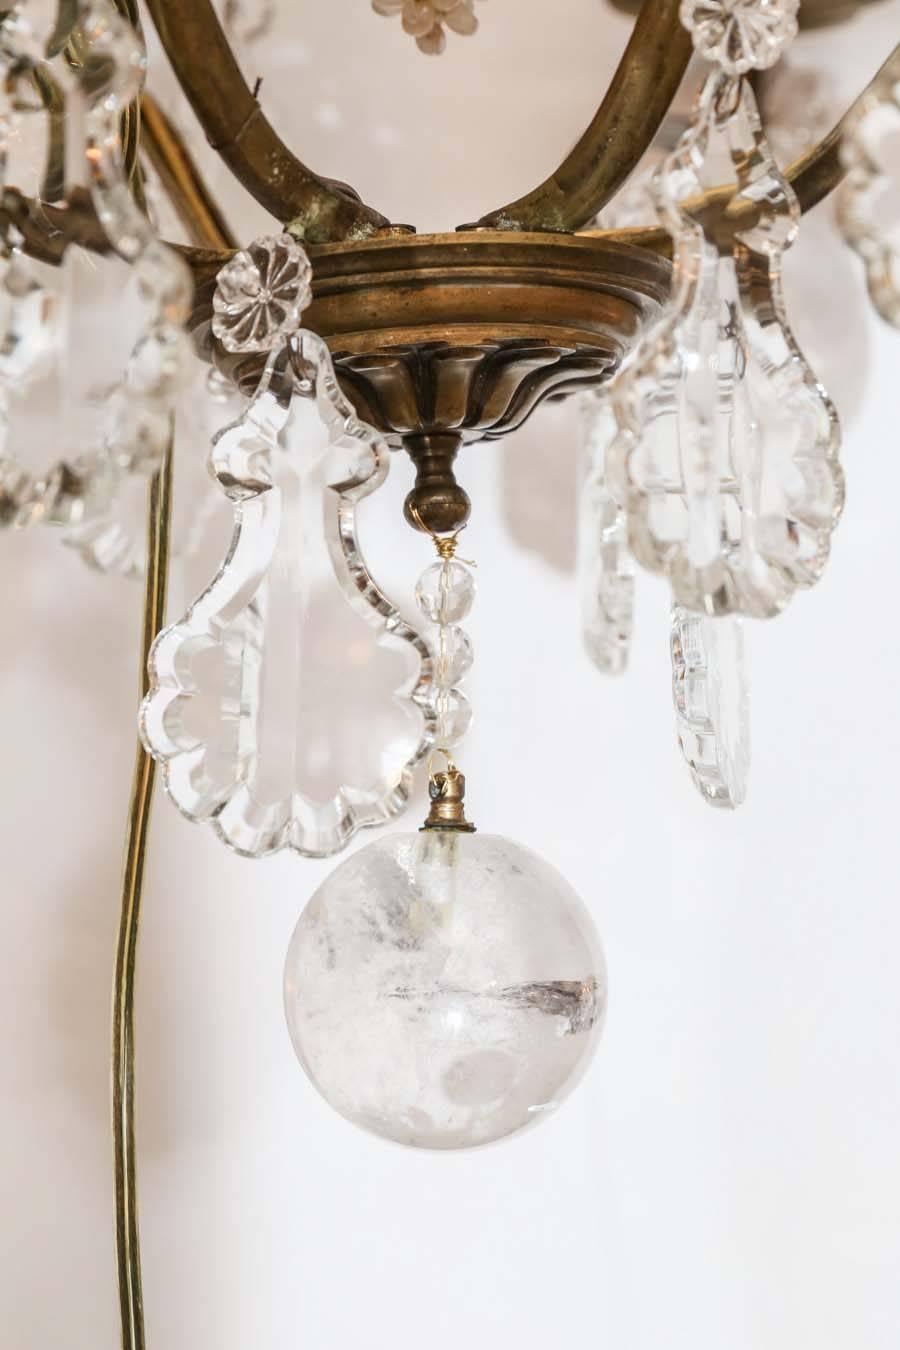 Six-light antique chandelier with clear and rock crystal.
The center has a cluster of smoke crystal grapes.